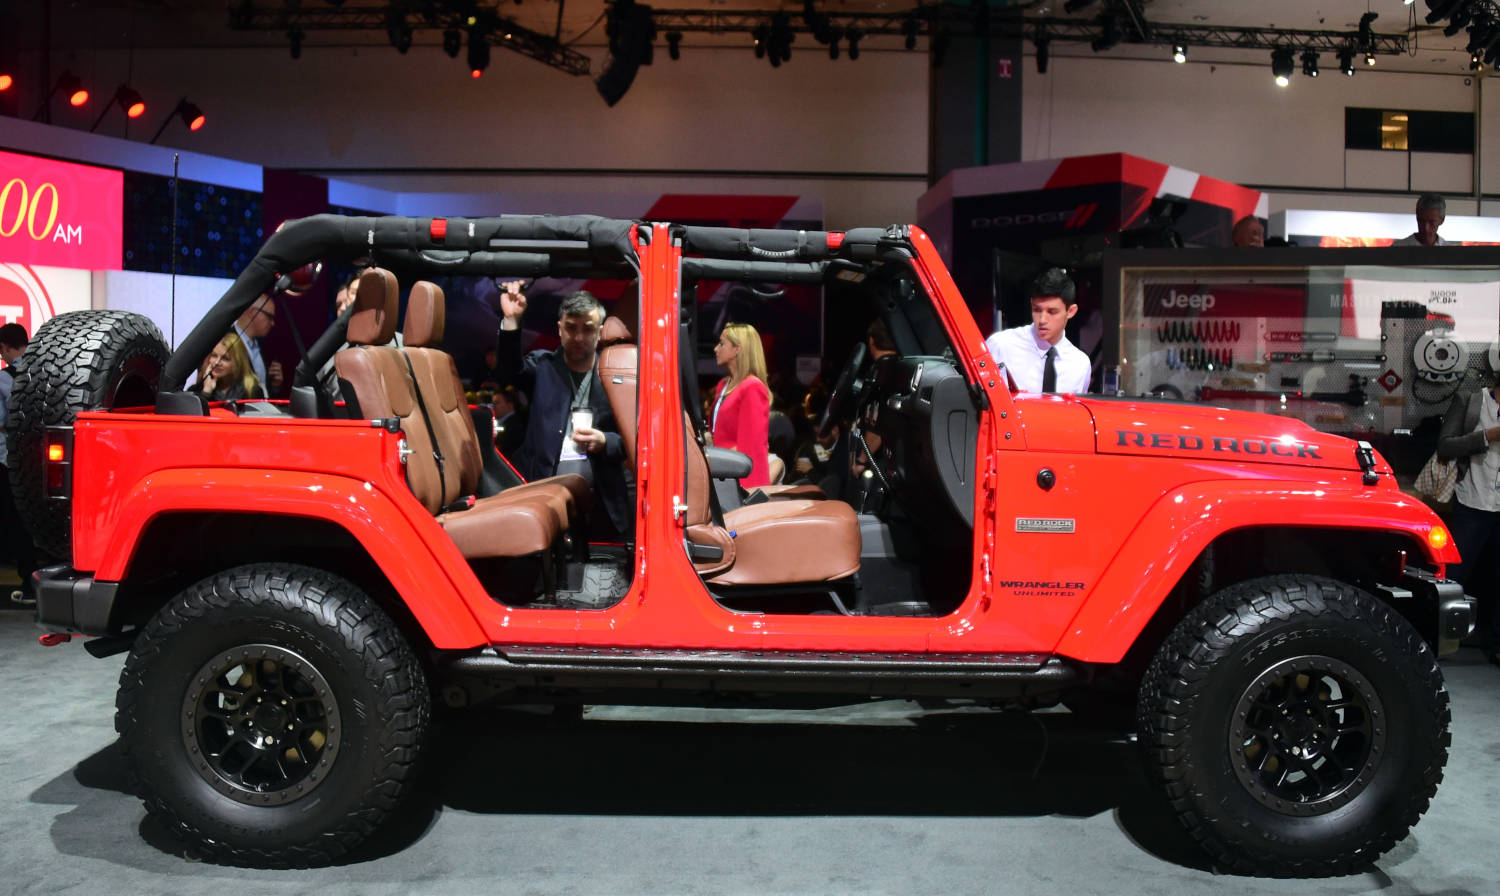 This Jeep Wrangler can fit car seats, maybe.